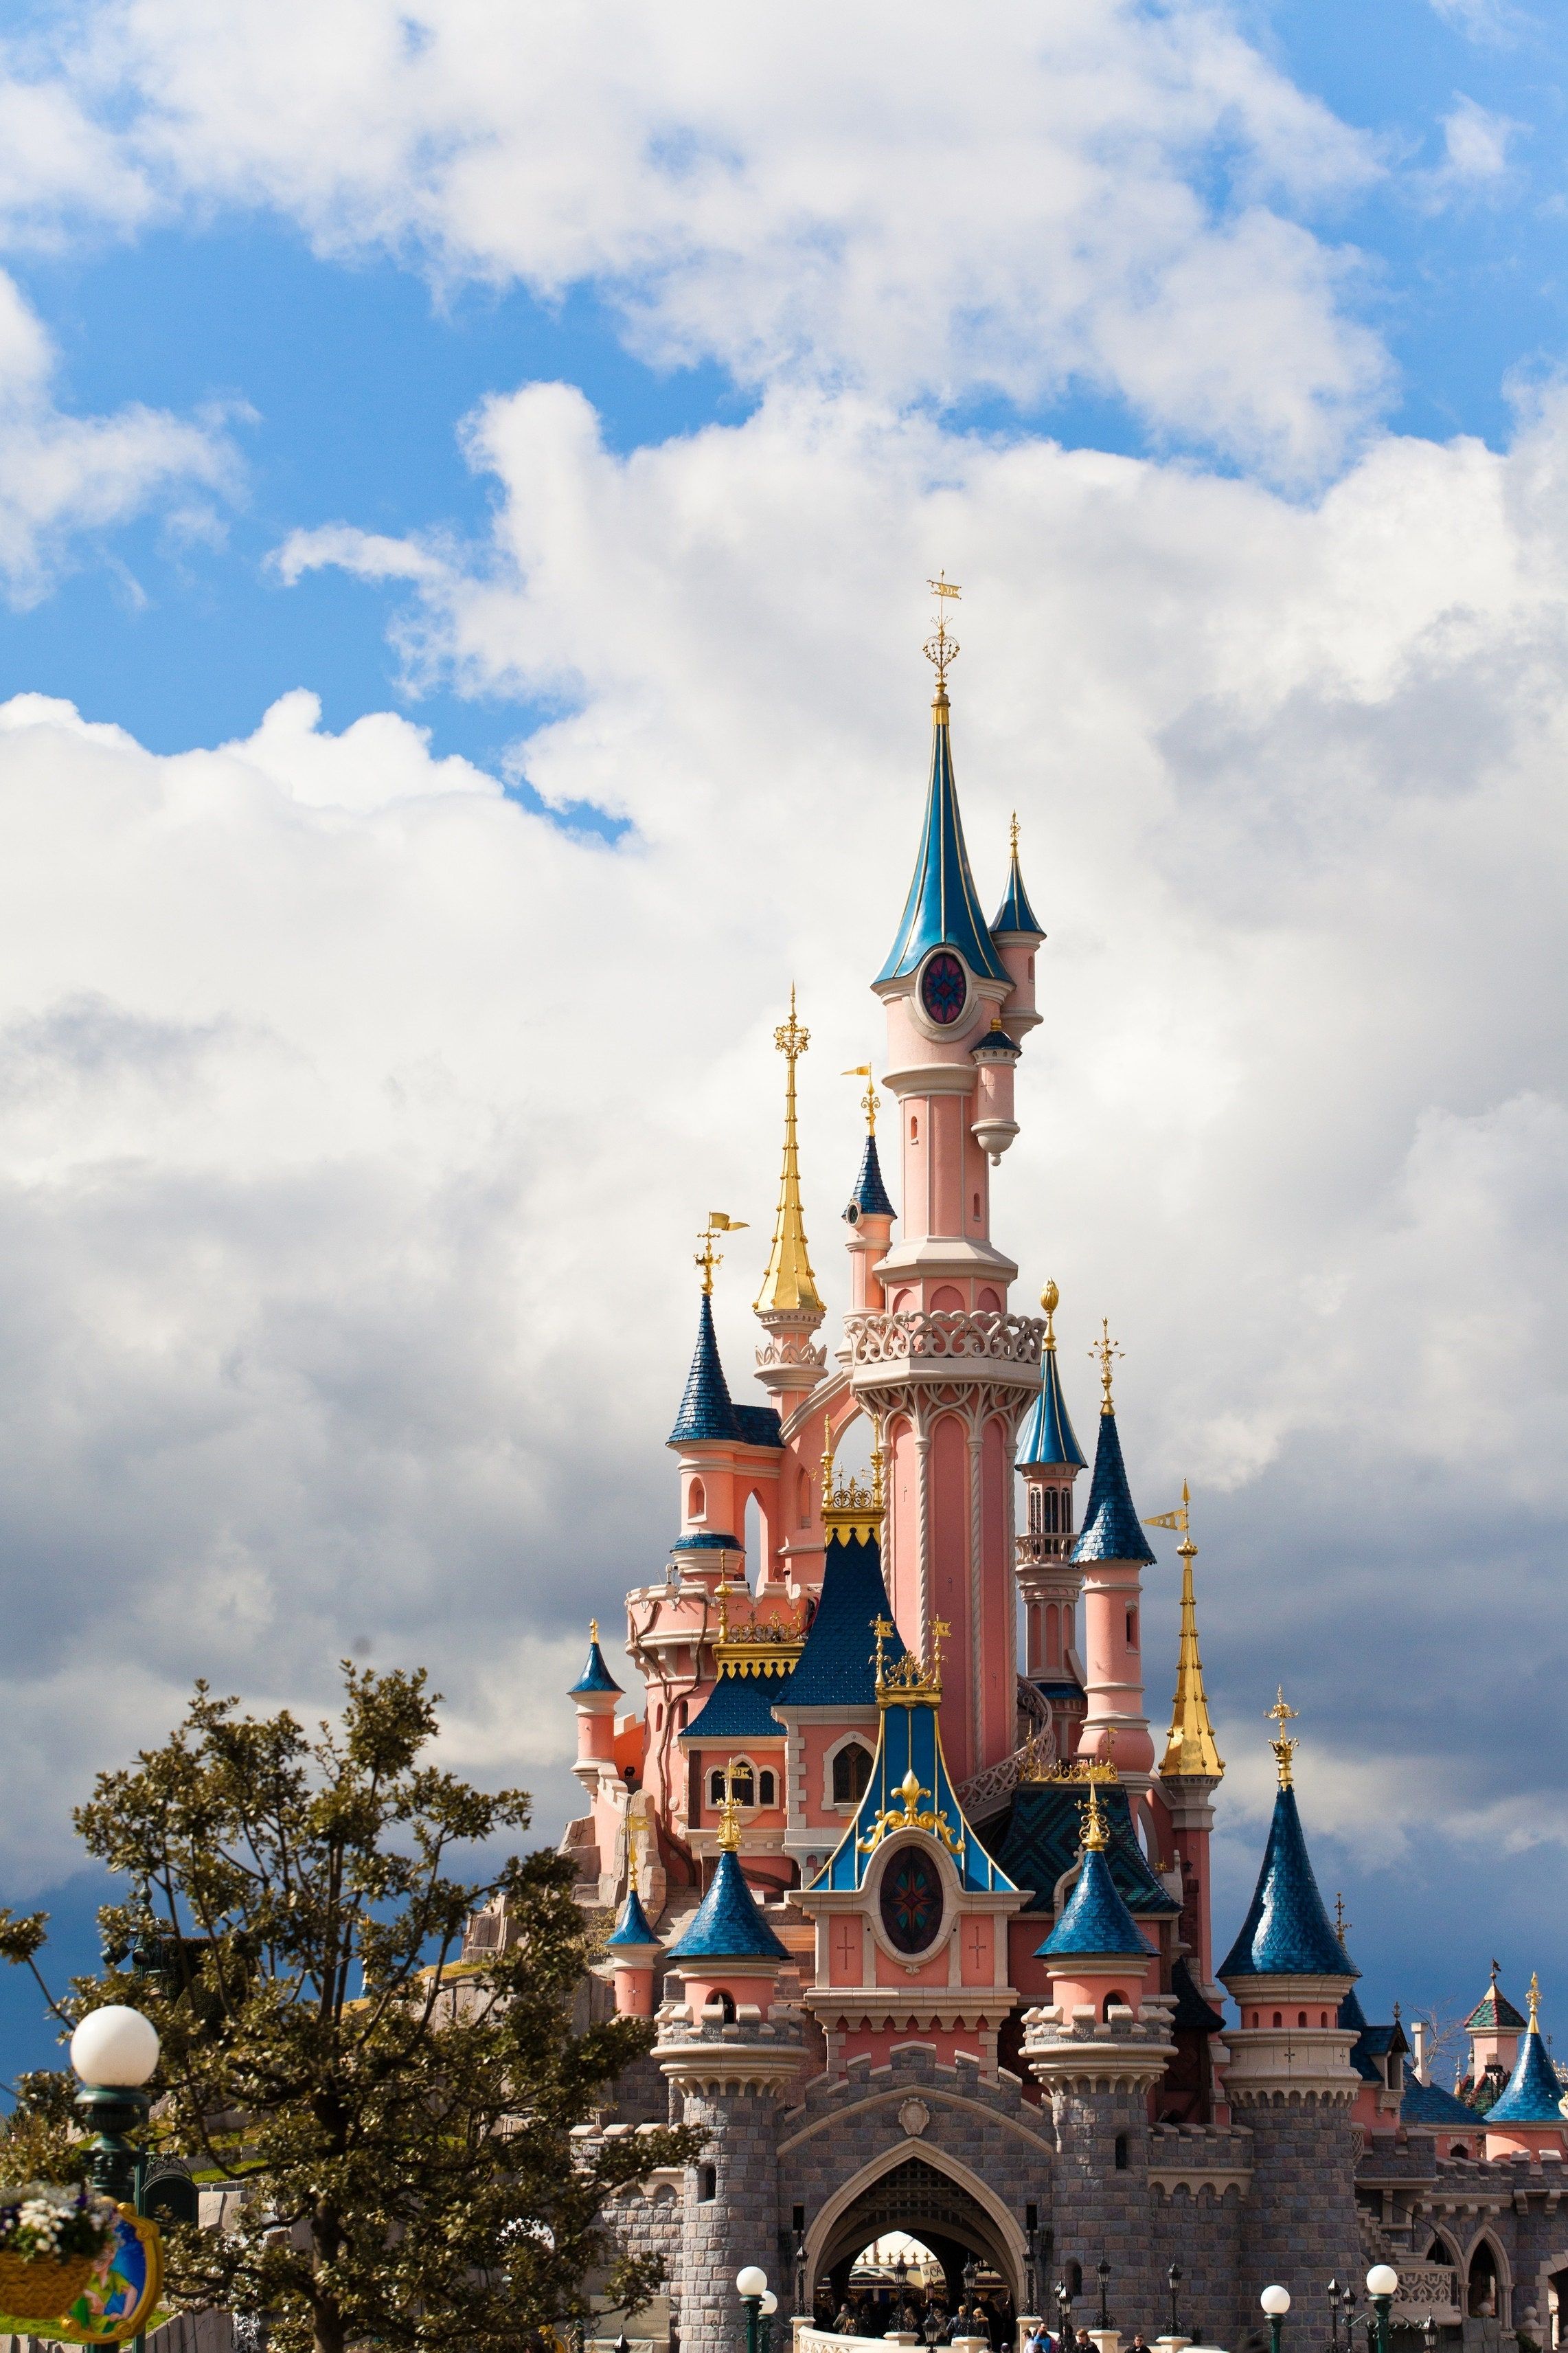 Disneyland Paris has launched a website full of fun activities to do at home